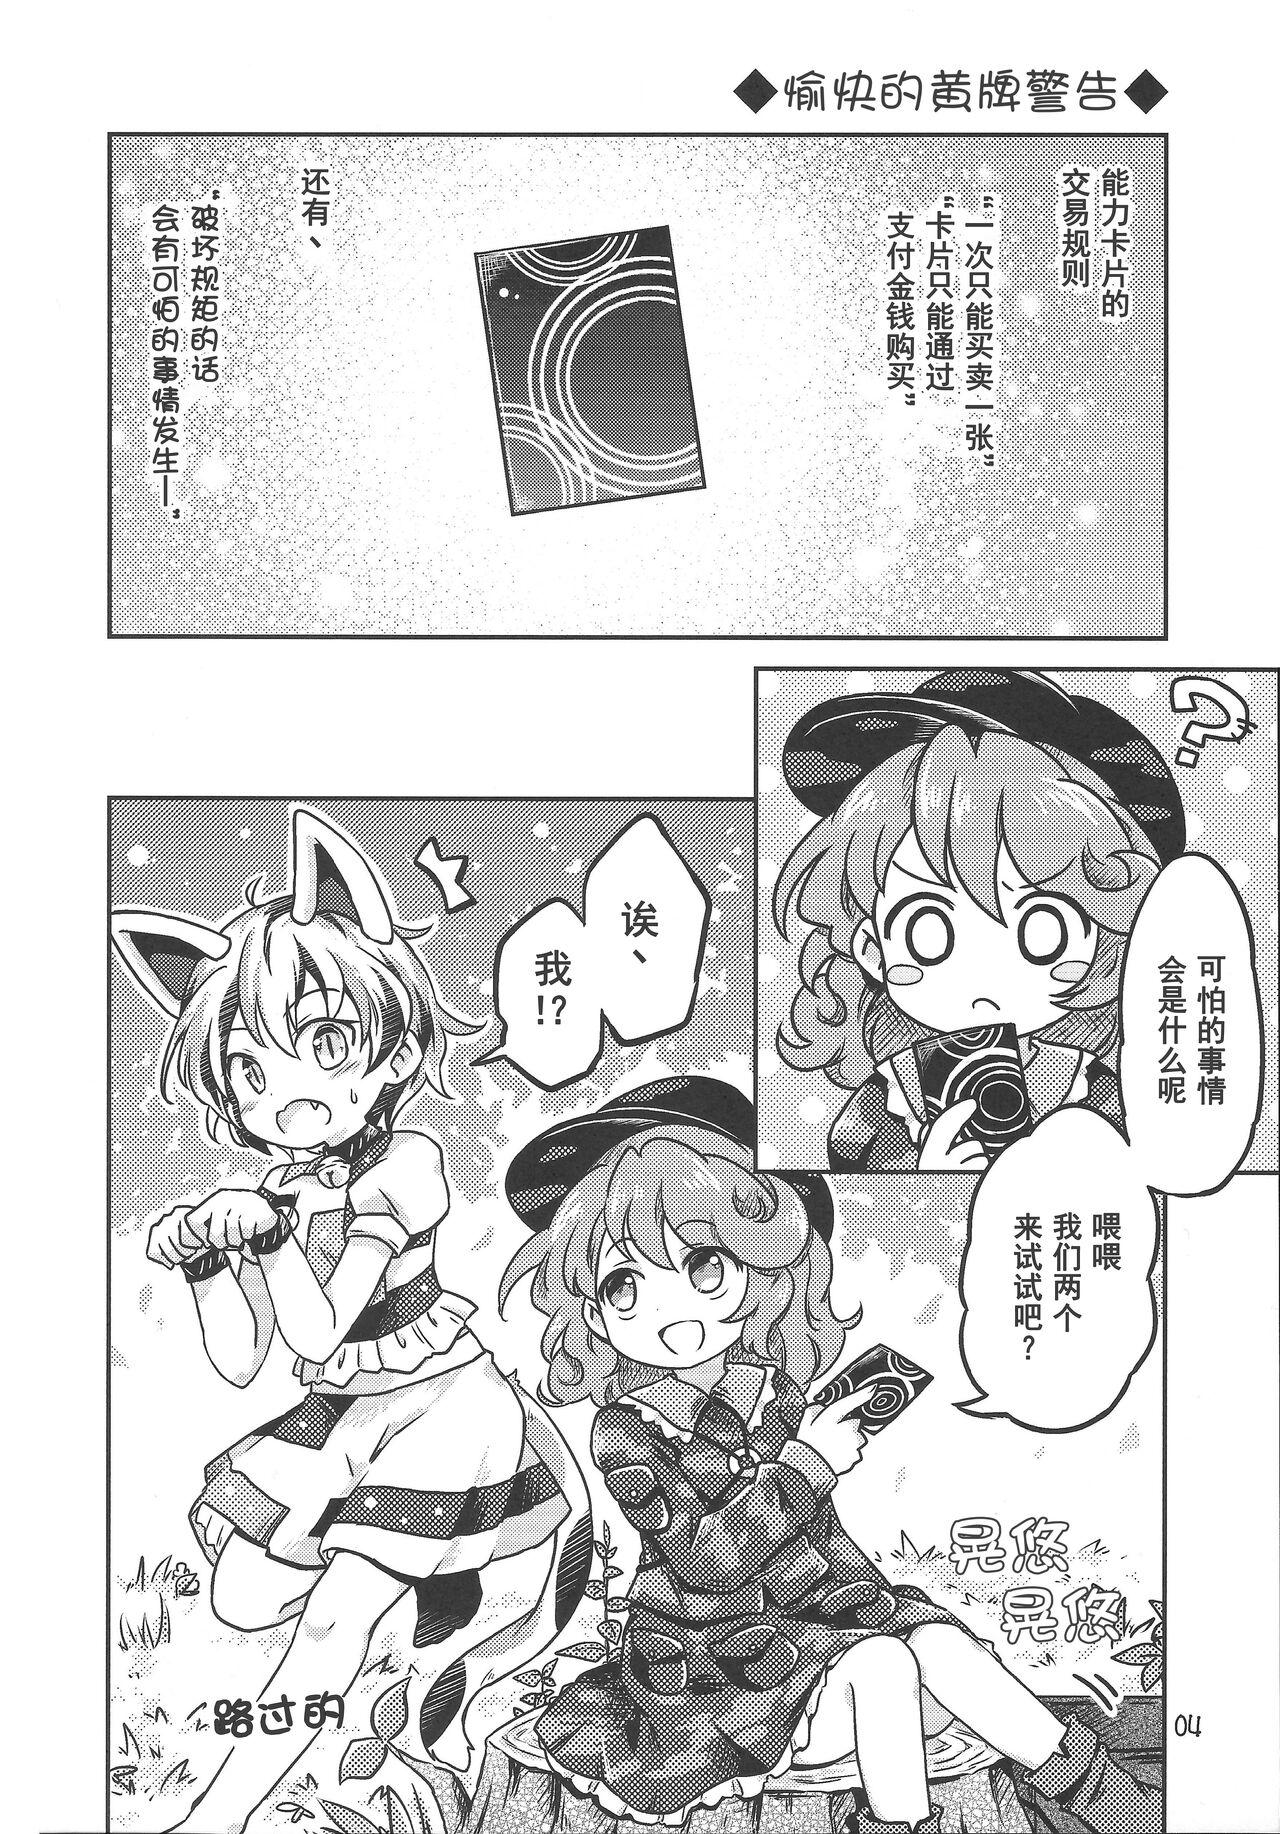 Cbt 《千亦酱的活动日志》 - Touhou project Gay Cumjerkingoff - Page 4